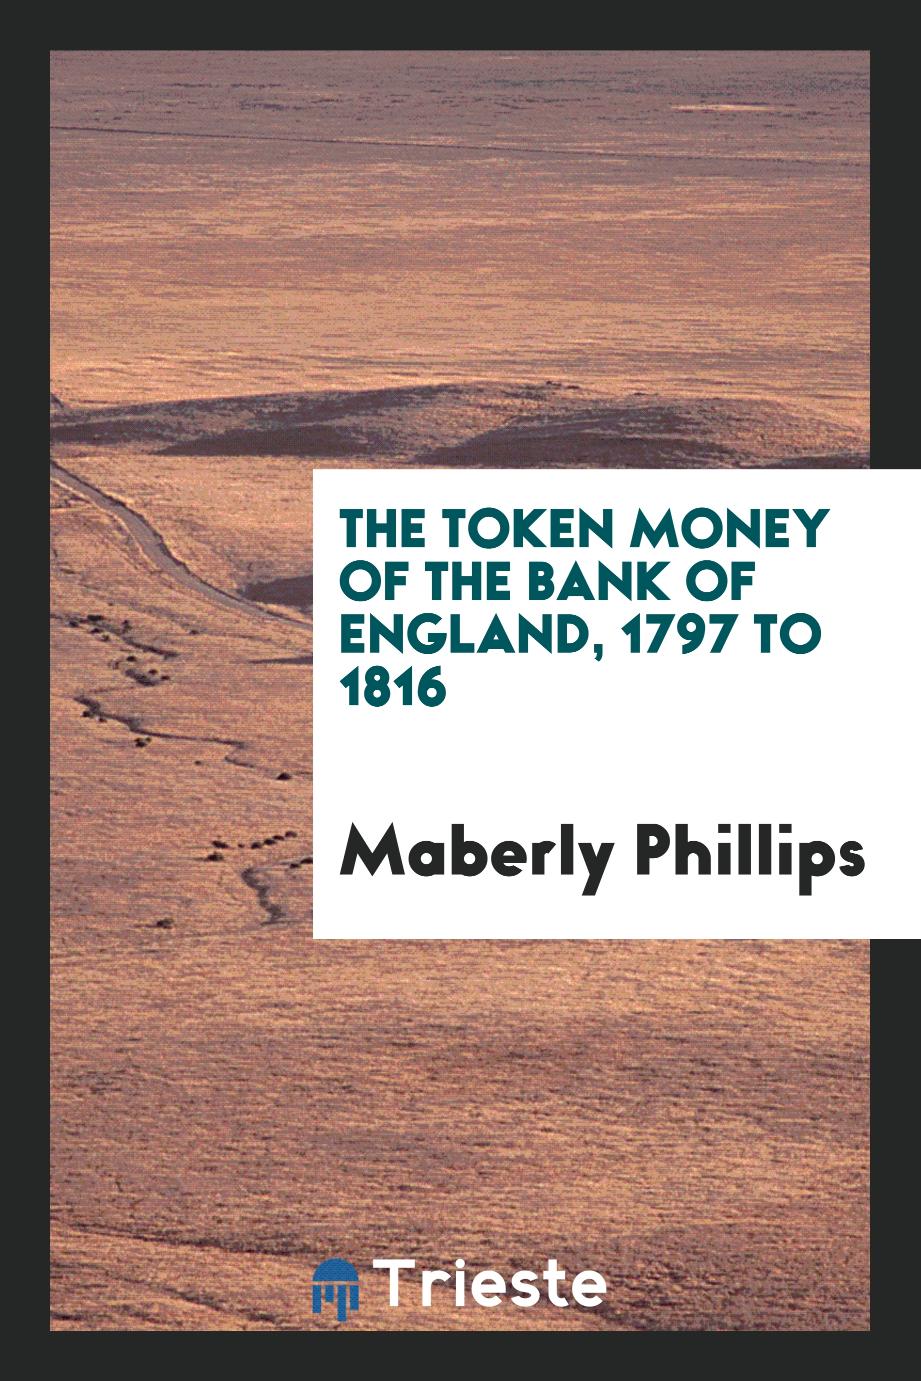 The token money of the Bank of England, 1797 to 1816